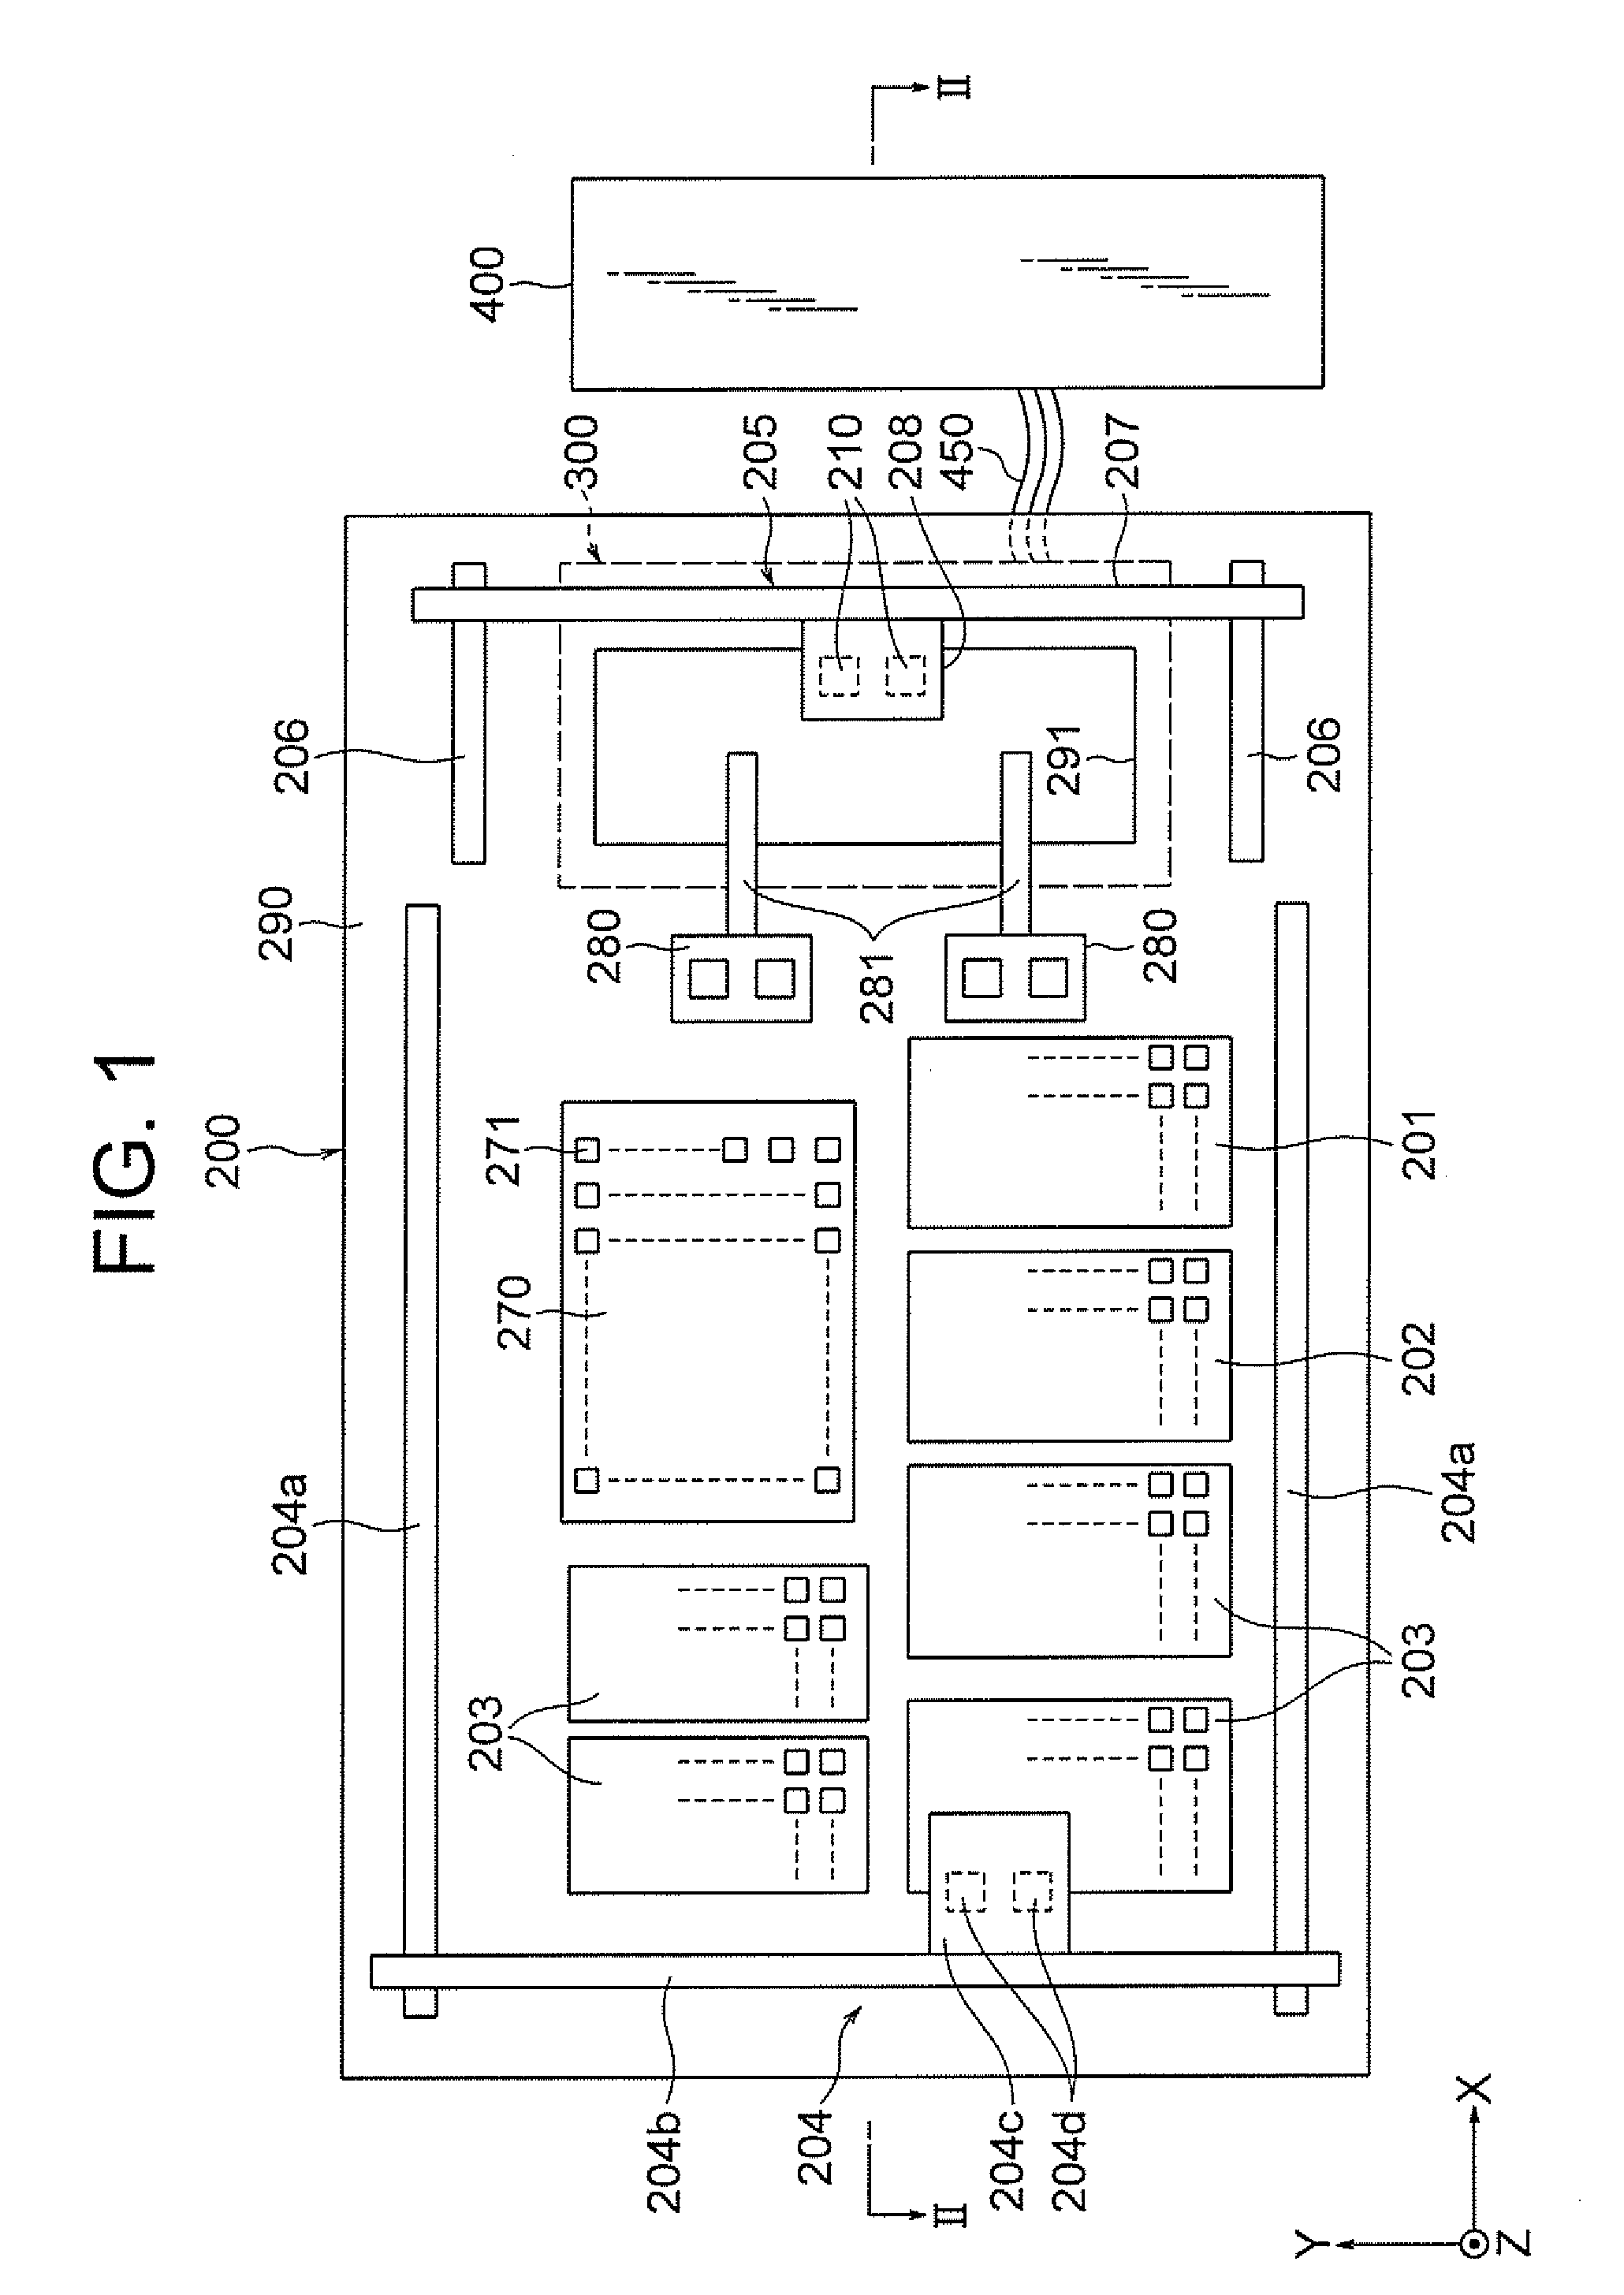 Contact pusher, contact arm, and electronic  device test apparatus